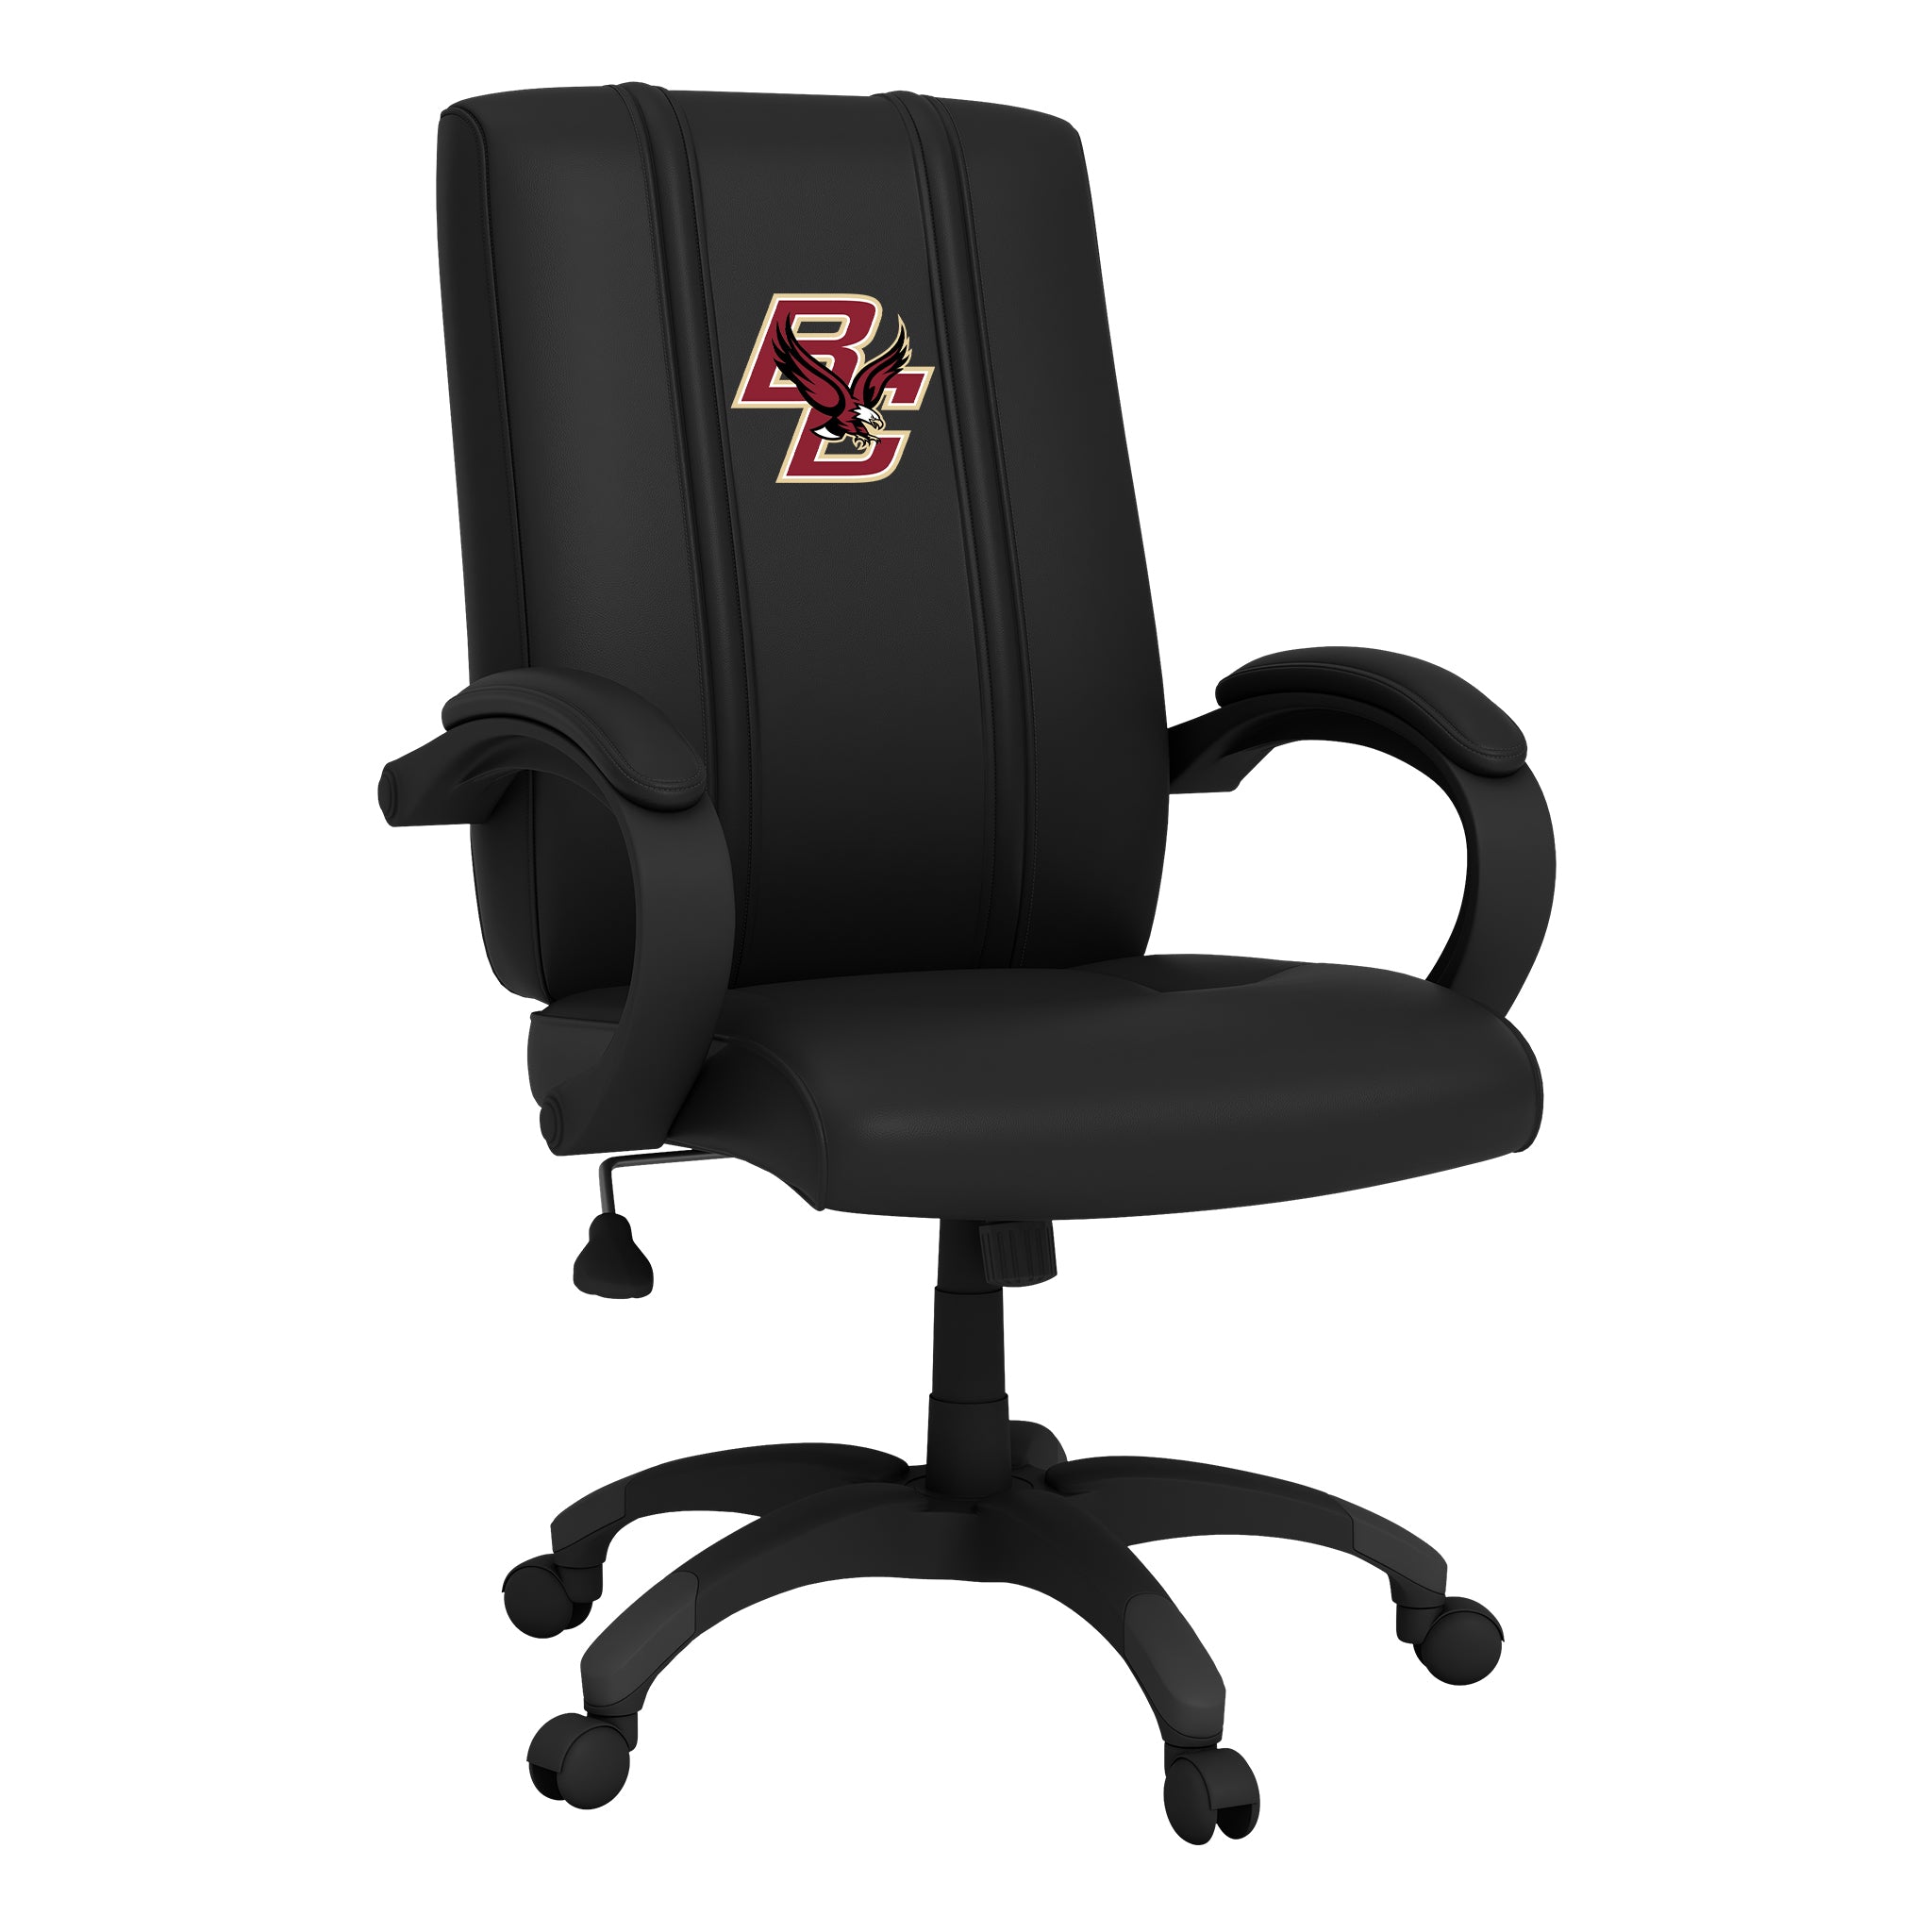 Boston College Eagles Office Chair 1000 with Boston College Eagles Logo